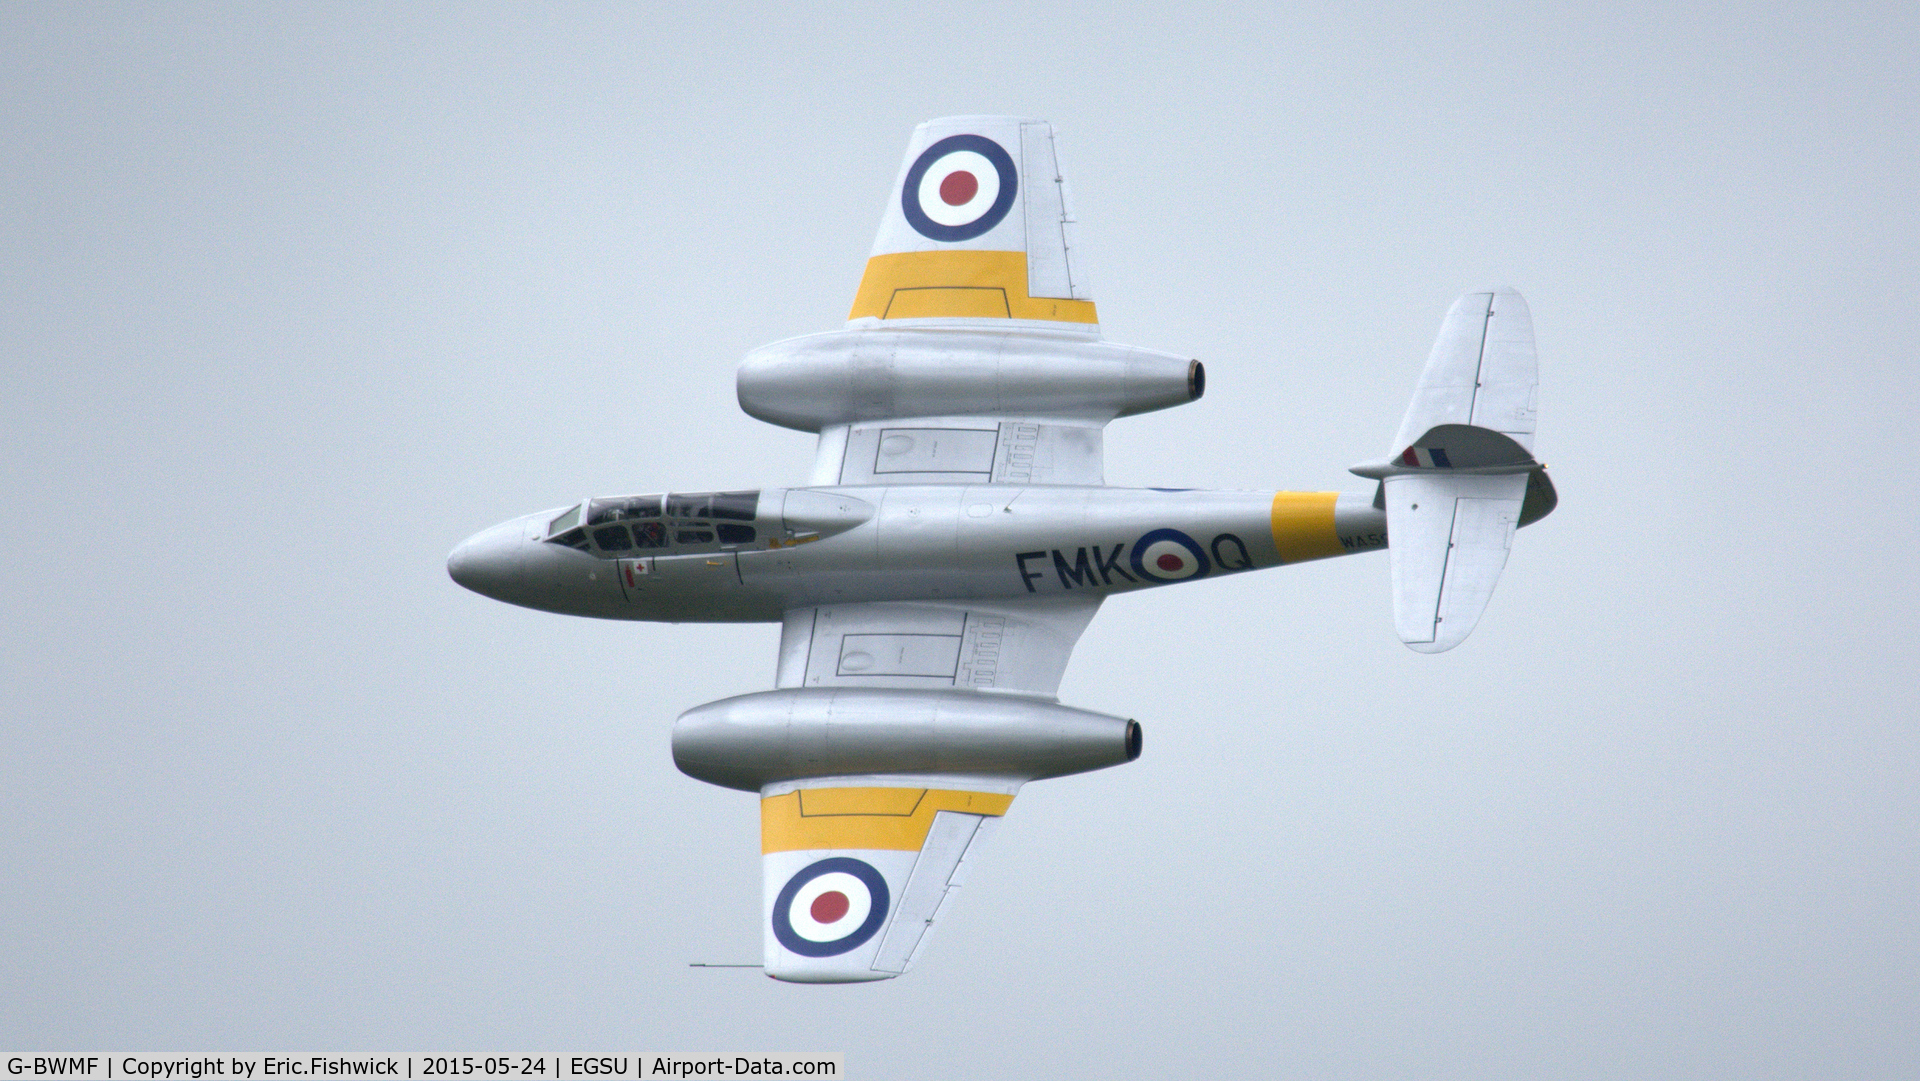 G-BWMF, 1949 Gloster Meteor T.7 C/N G5/356460, 41. G-BWMF - superb display at The IWM VE Day Anniversary Air Show, May 2015.